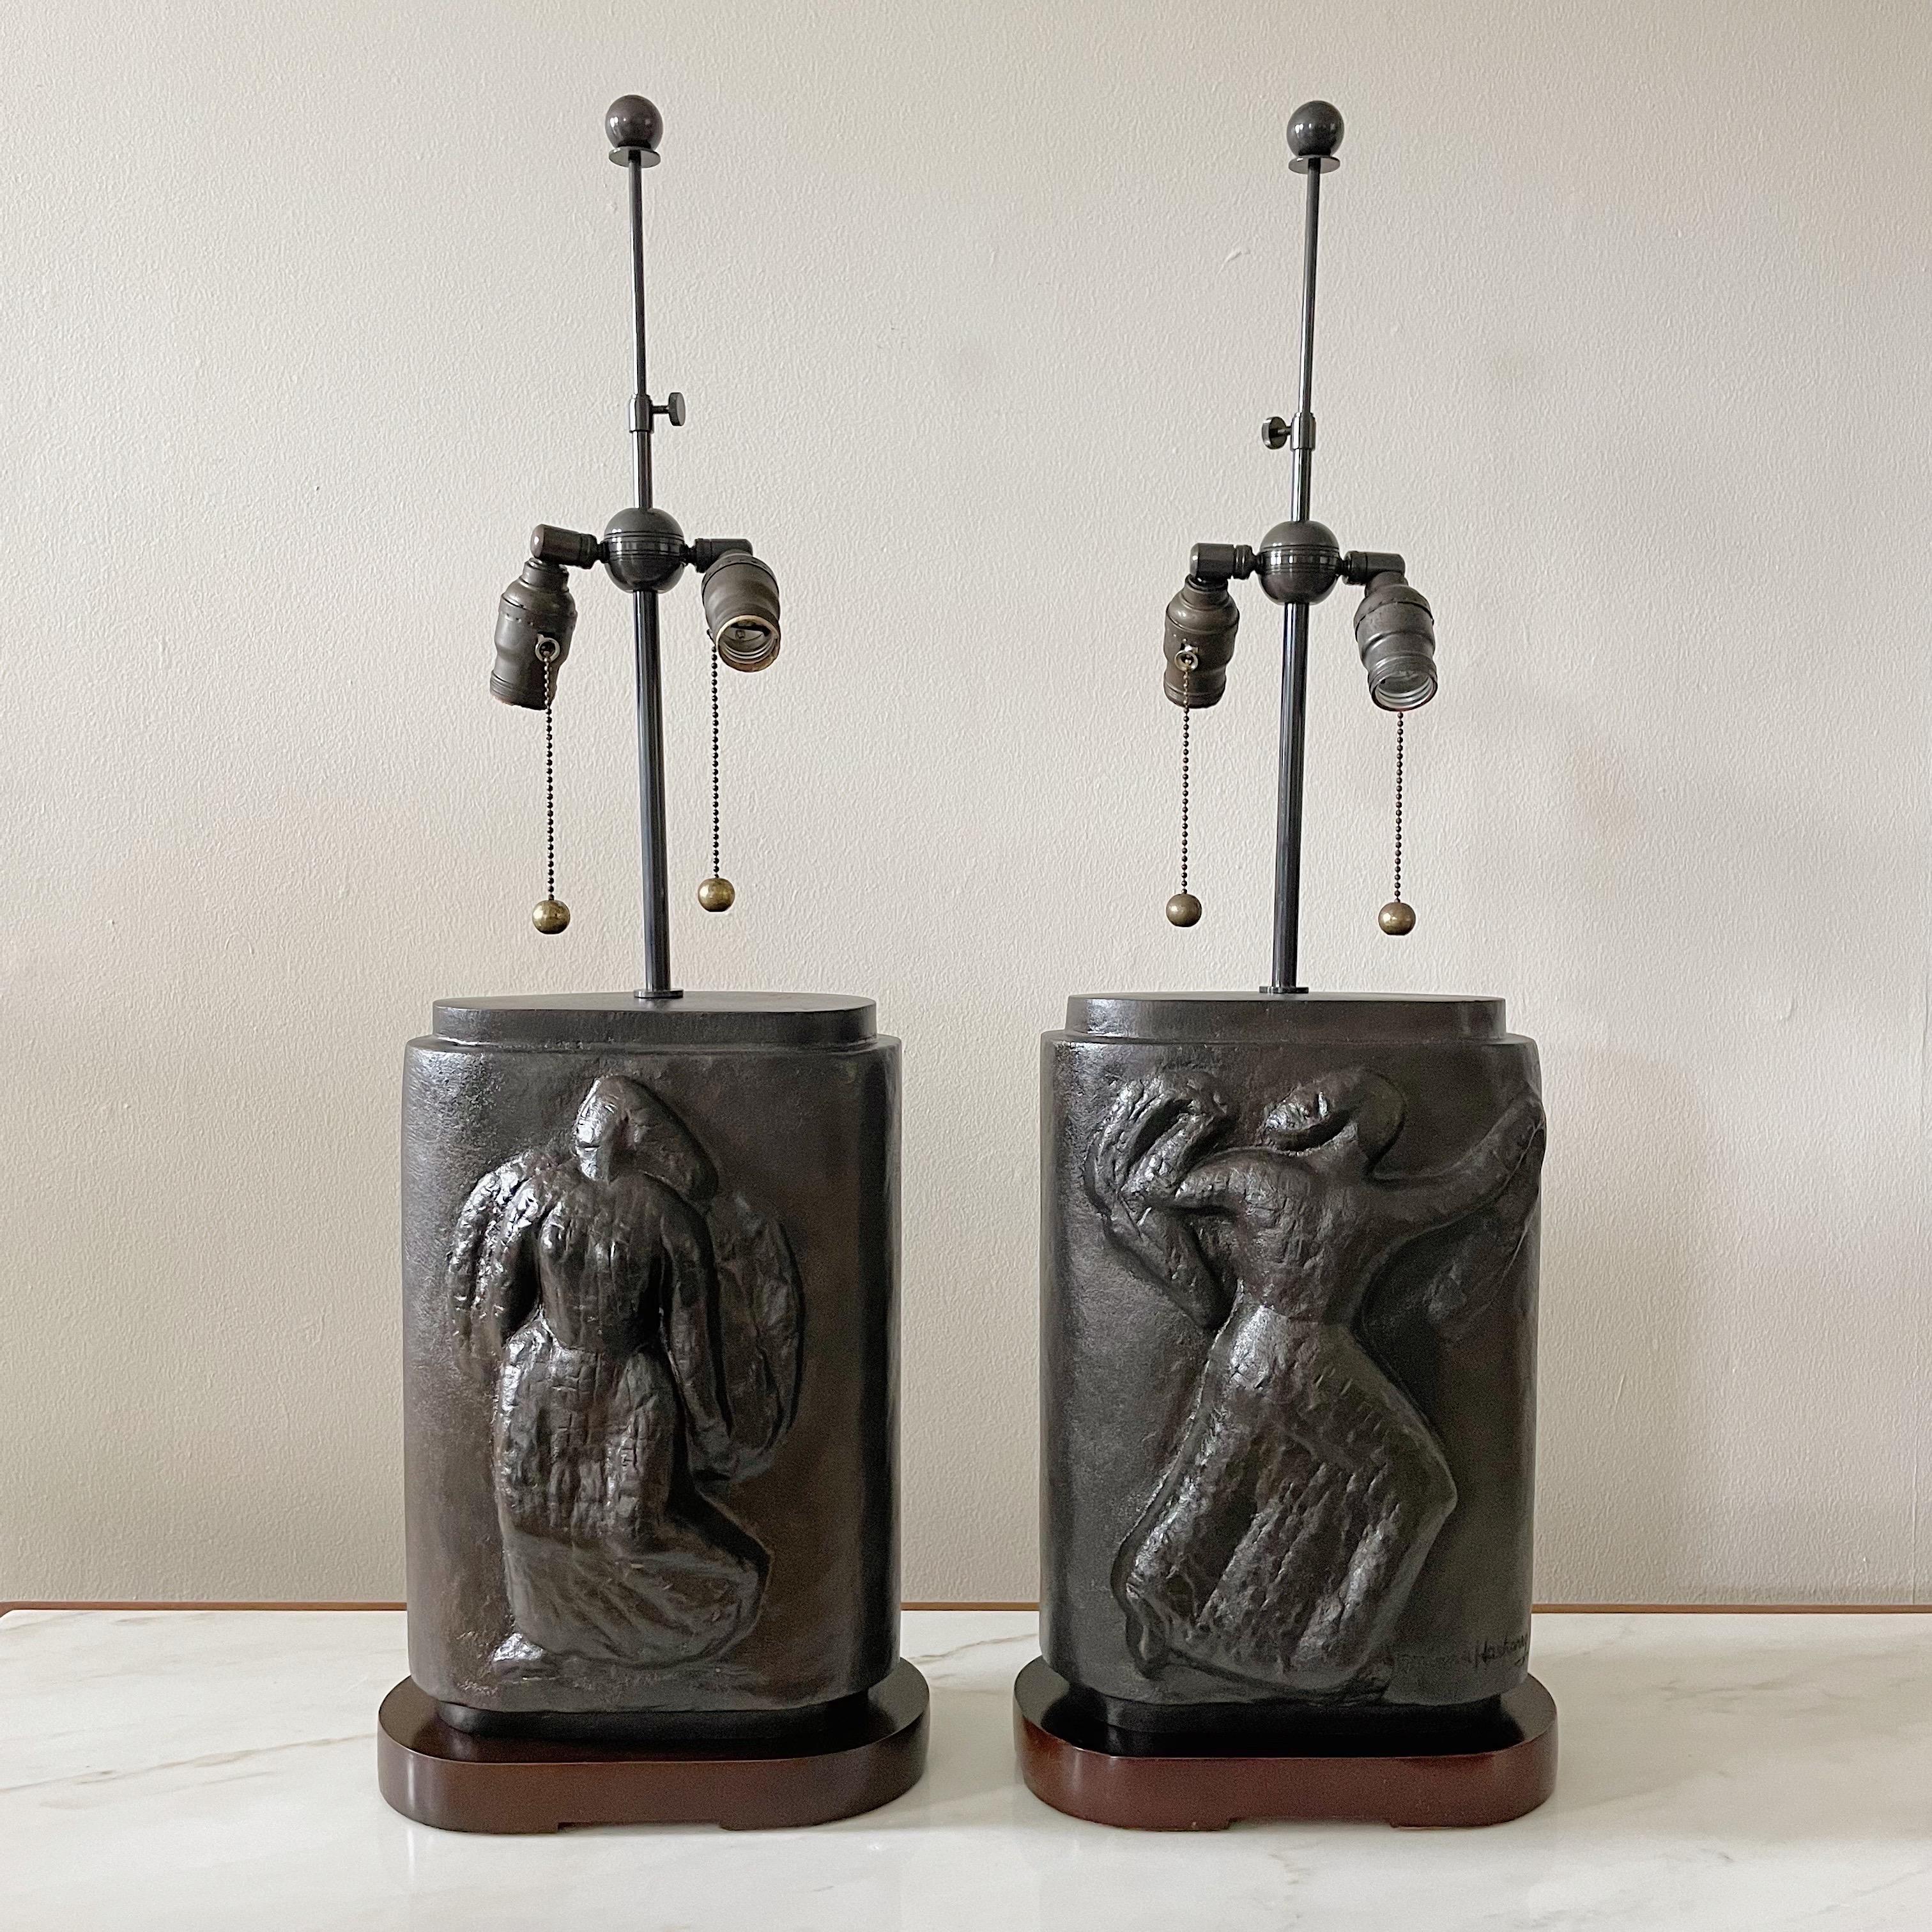 Pair of modernist 1930's sculptural bronze table lamps by WPA Artist Minna Harkavy. Raised figural reliefs on both sides of the lamps, with original wood bases. These lamps are extremely heavy thick cast bronze. Recently rewired with brown French